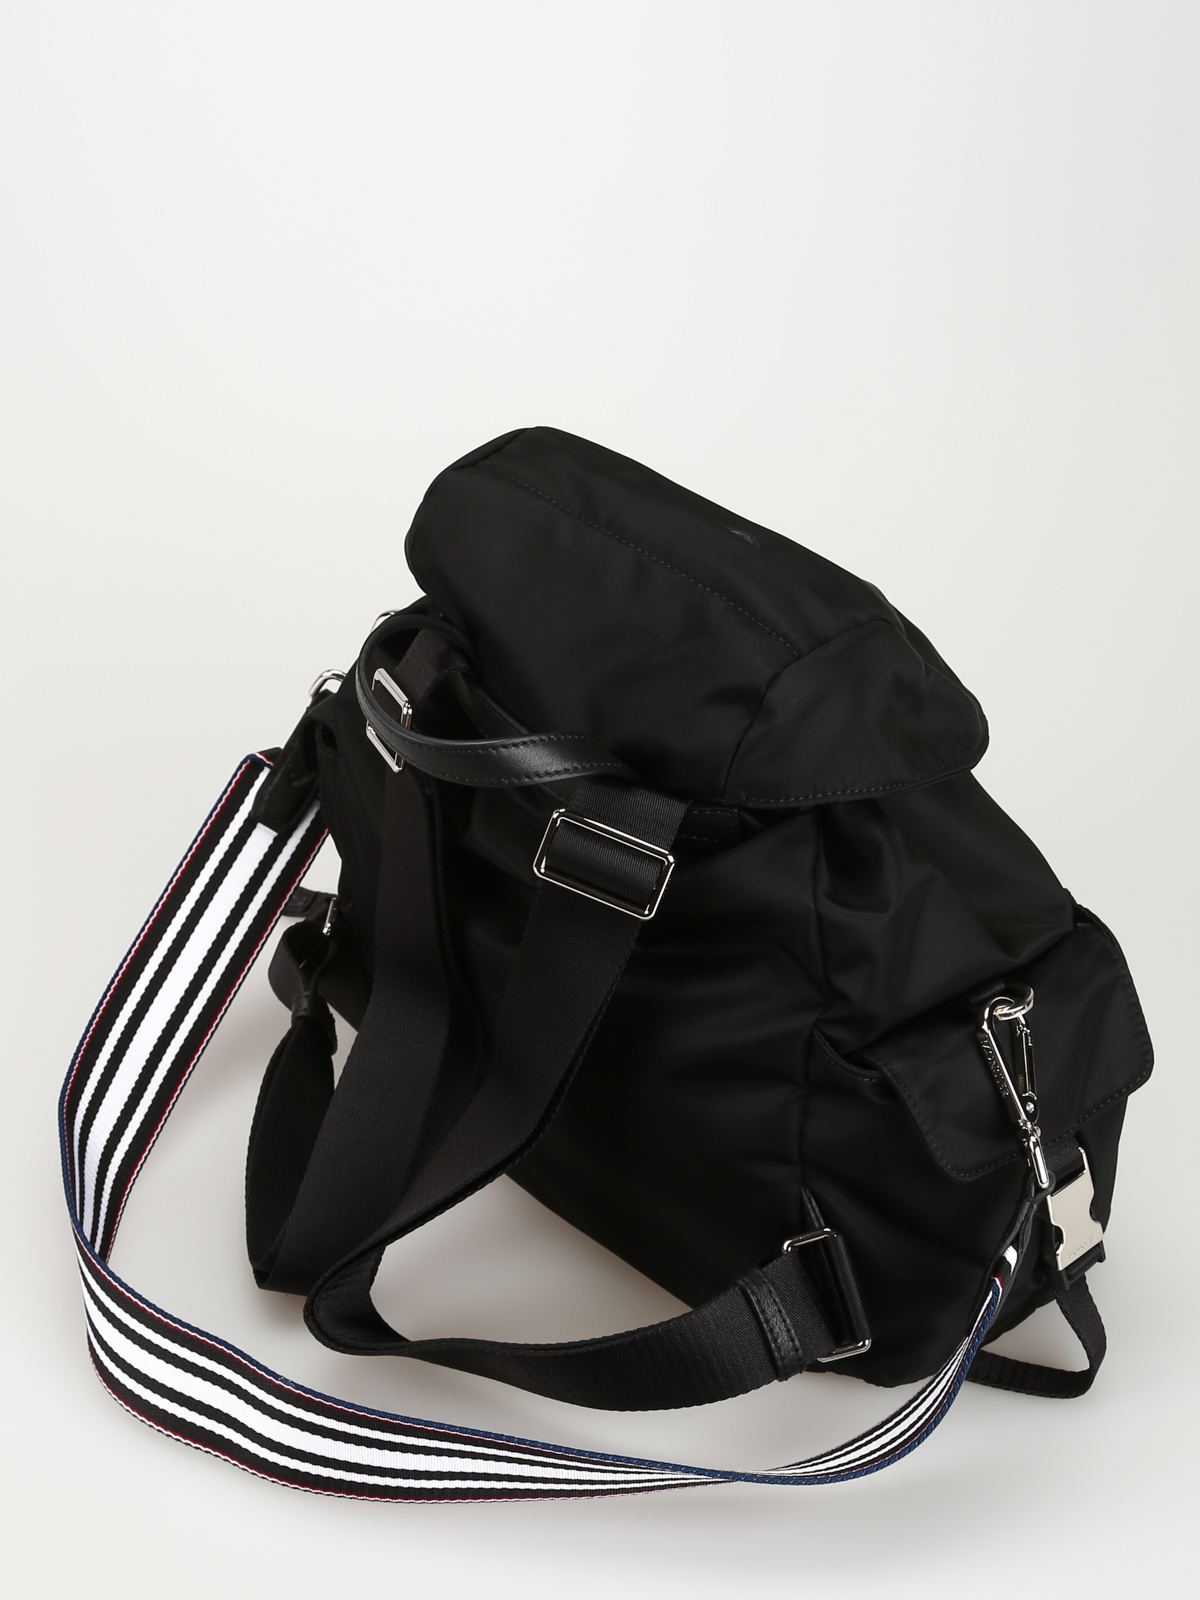 Buy Moncler Dauphine Backpack 'Black' - E209A 00673 00 53234 999